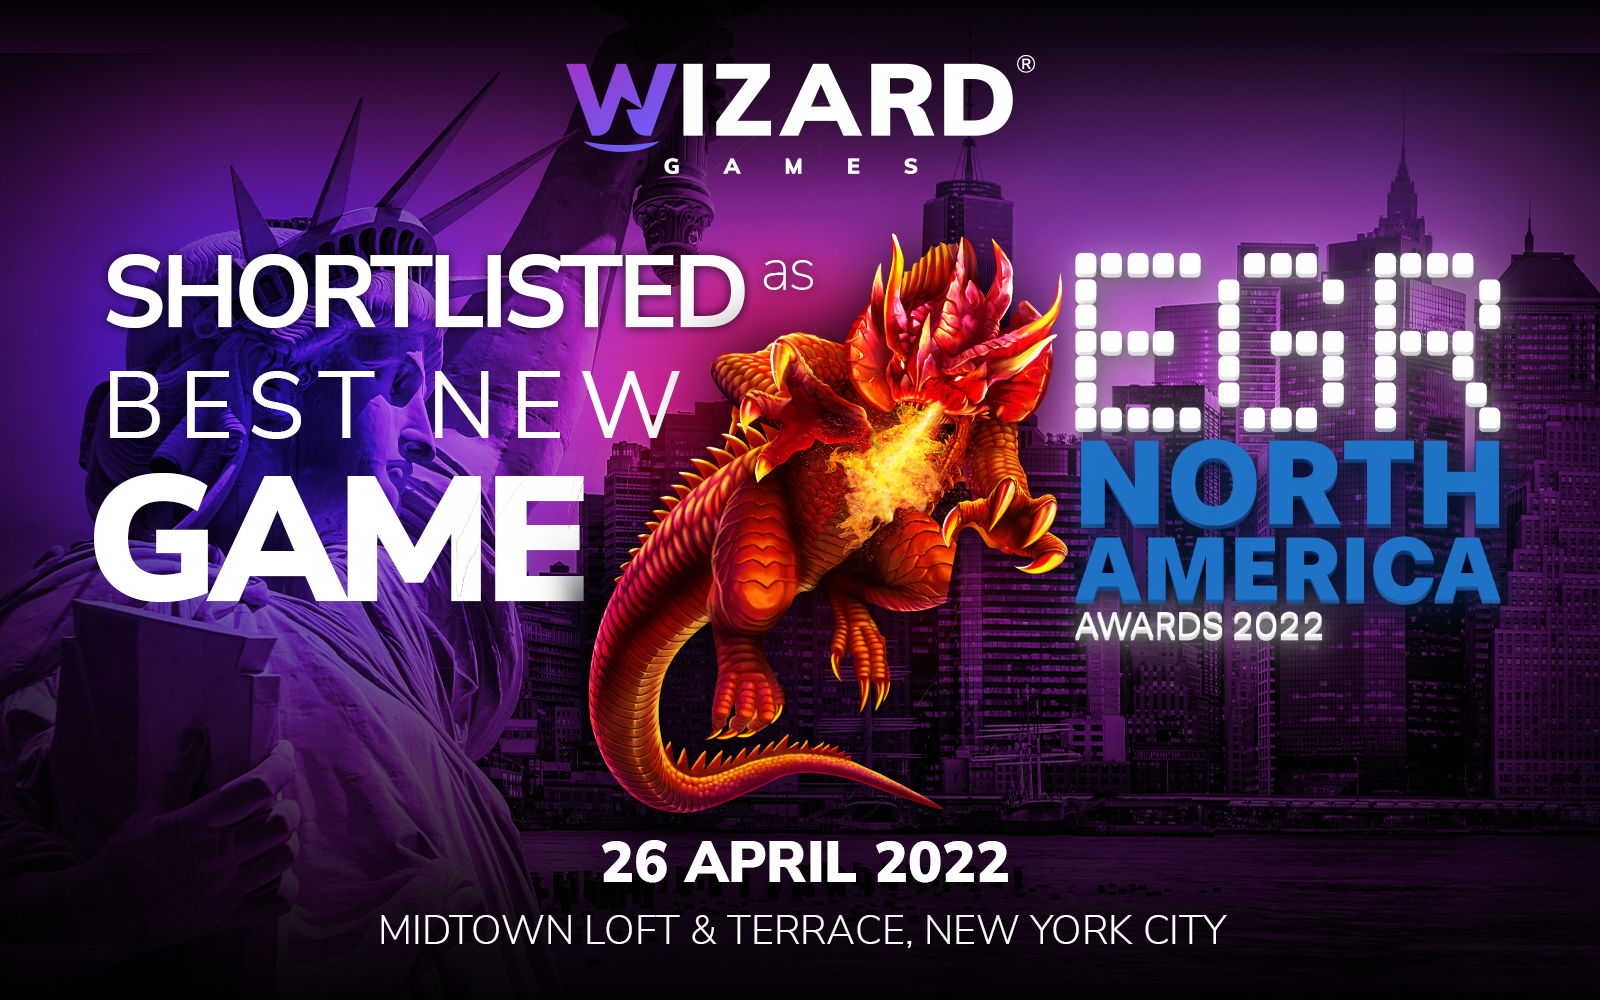 Wizard Games has been shortlisted at EGR North America Awards 2022